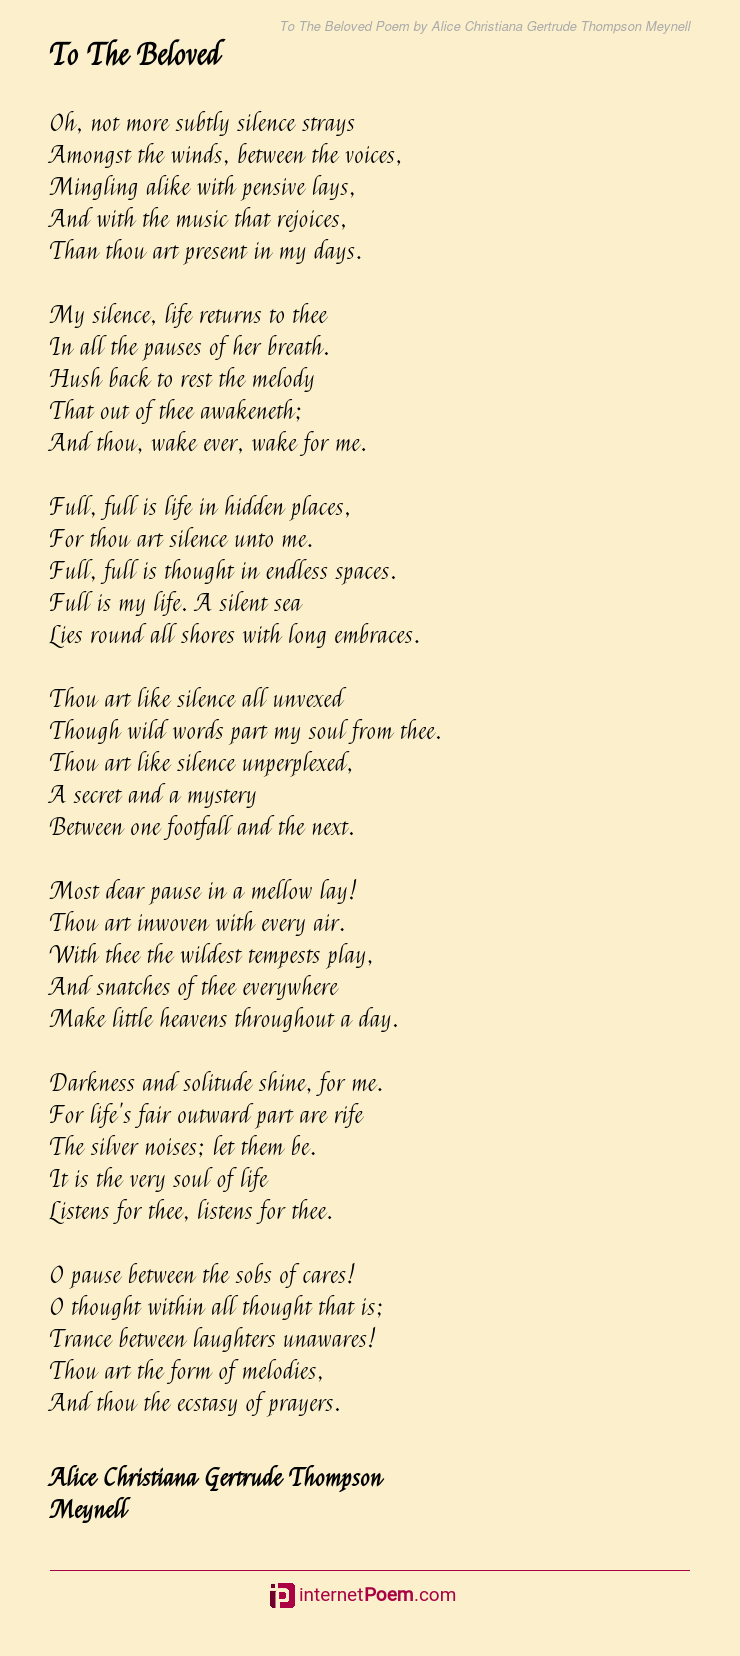 To The Beloved Poem by Alice Christiana Gertrude Thompson Meynell